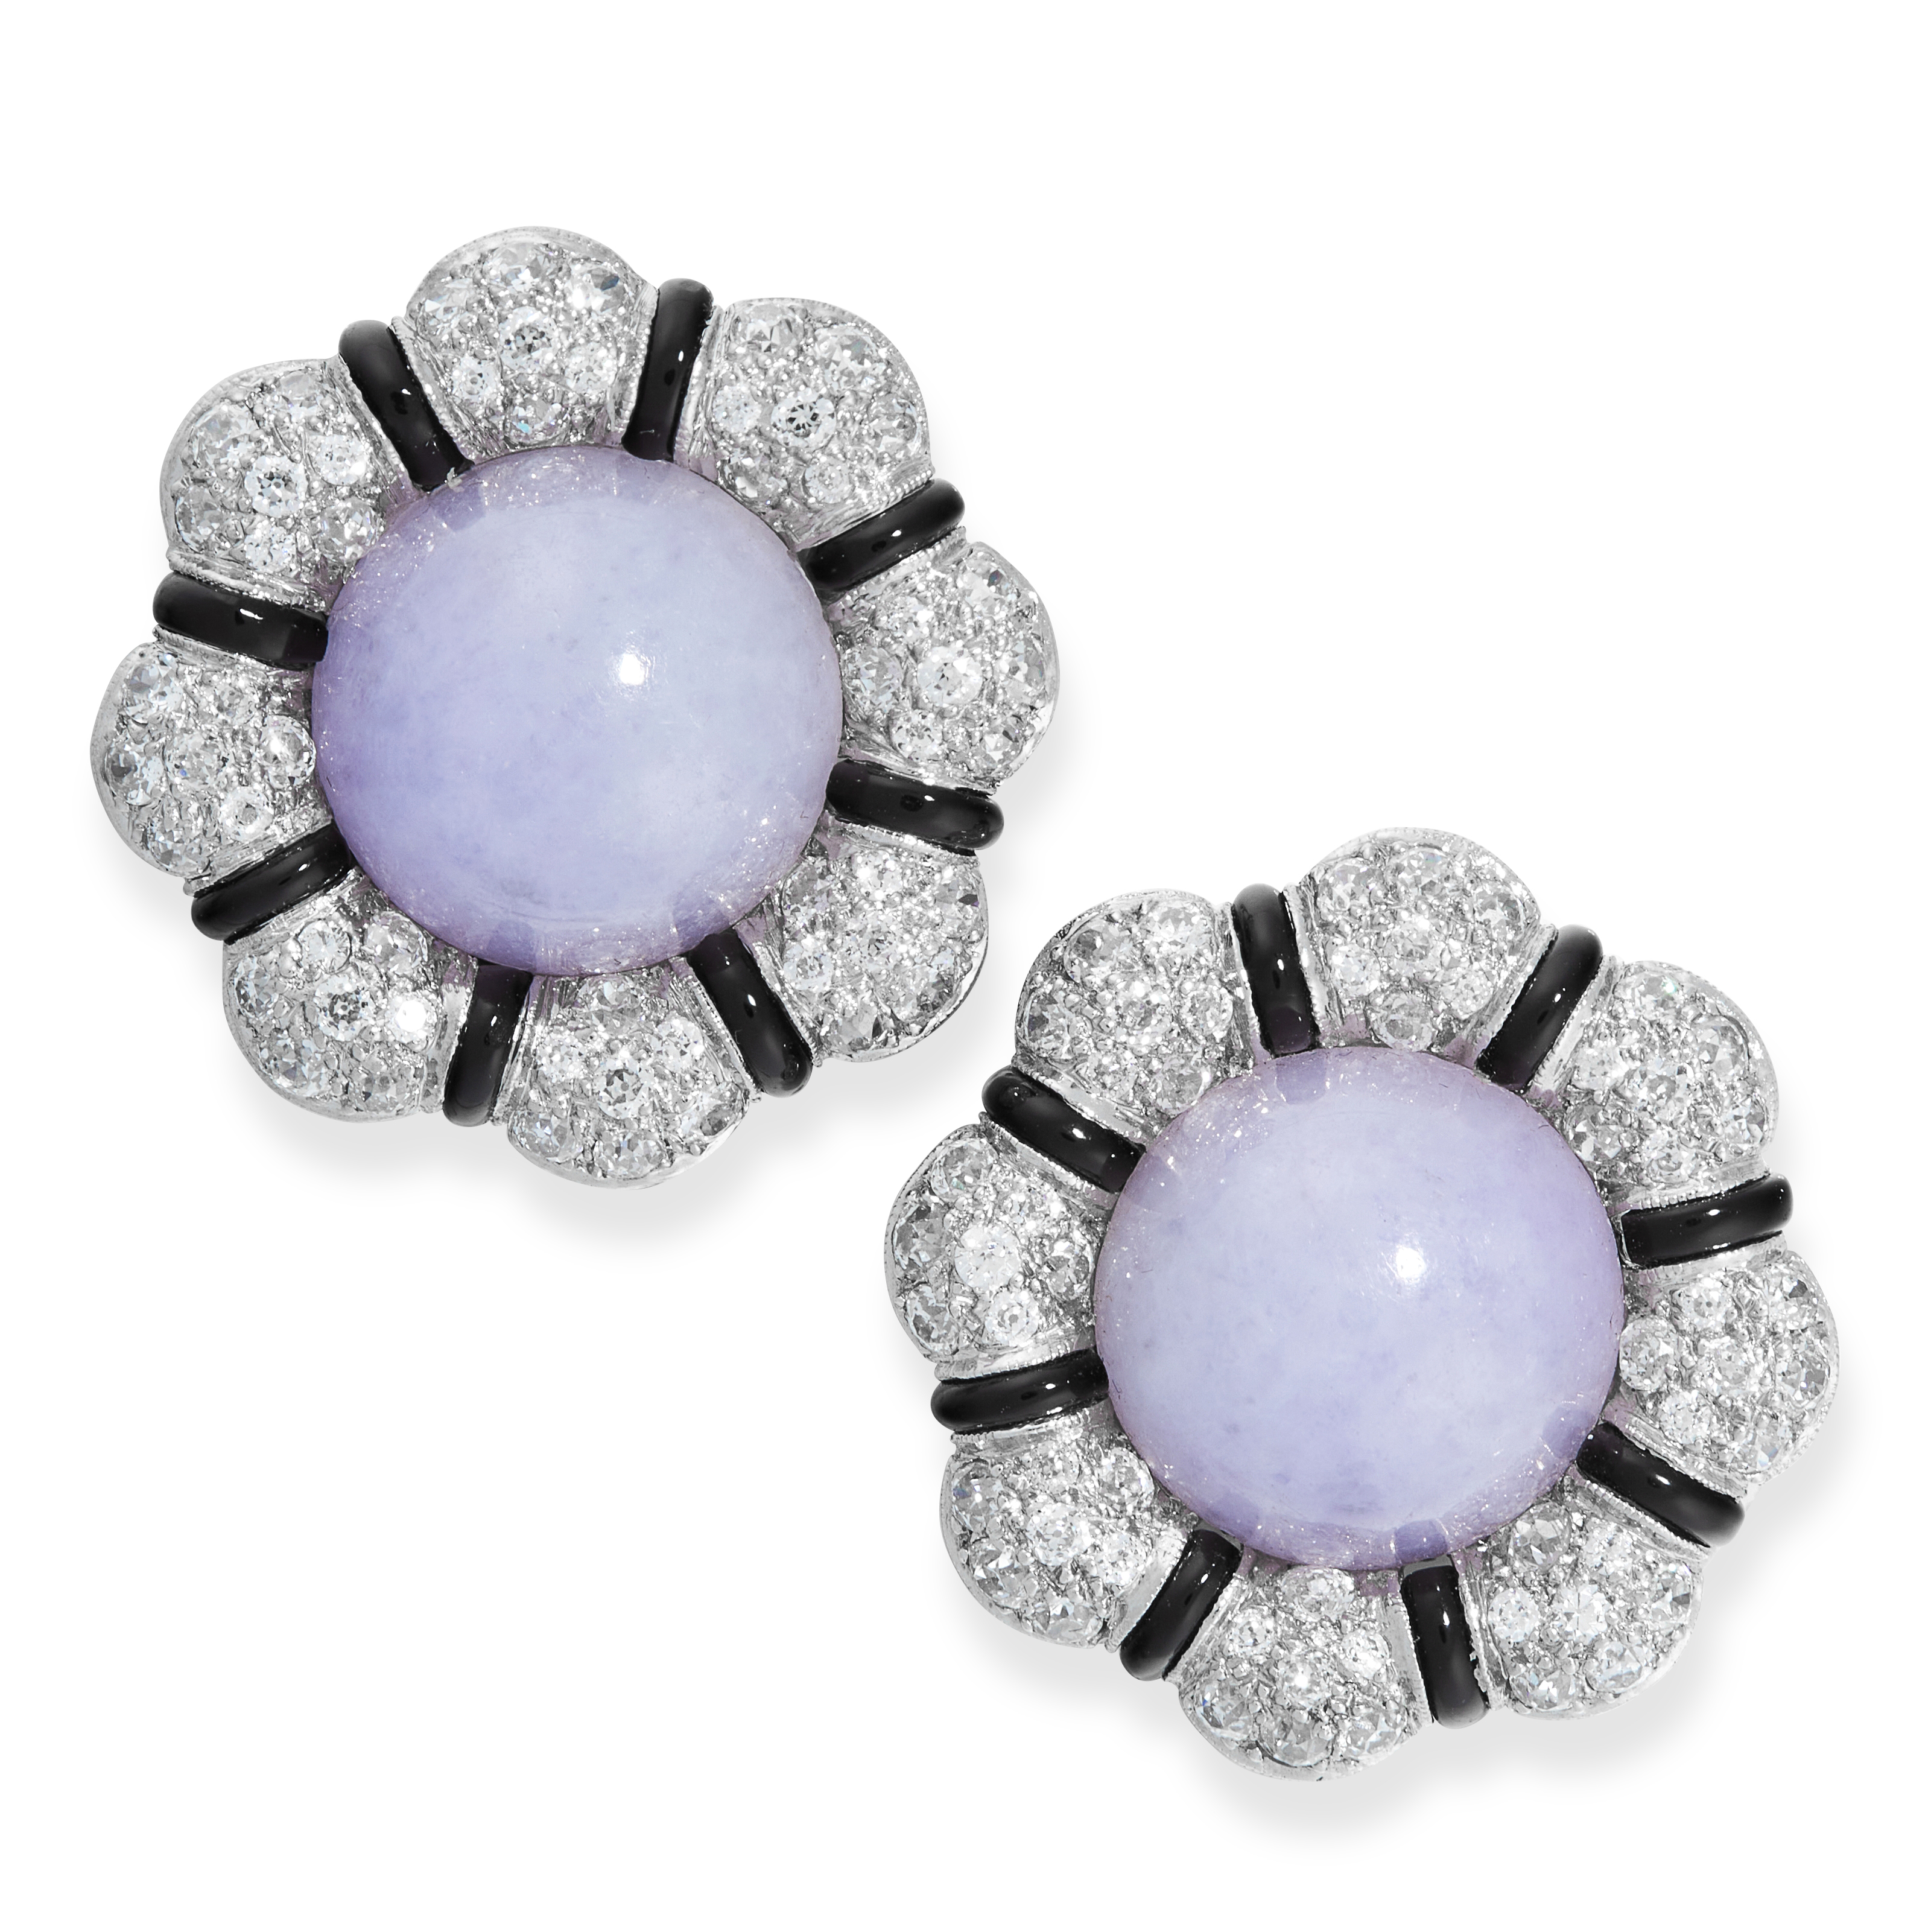 PAIR OF LAVENDER JADEITE, ONYX AND DIAMOND EARRINGS each centred on a cabochon of lavender